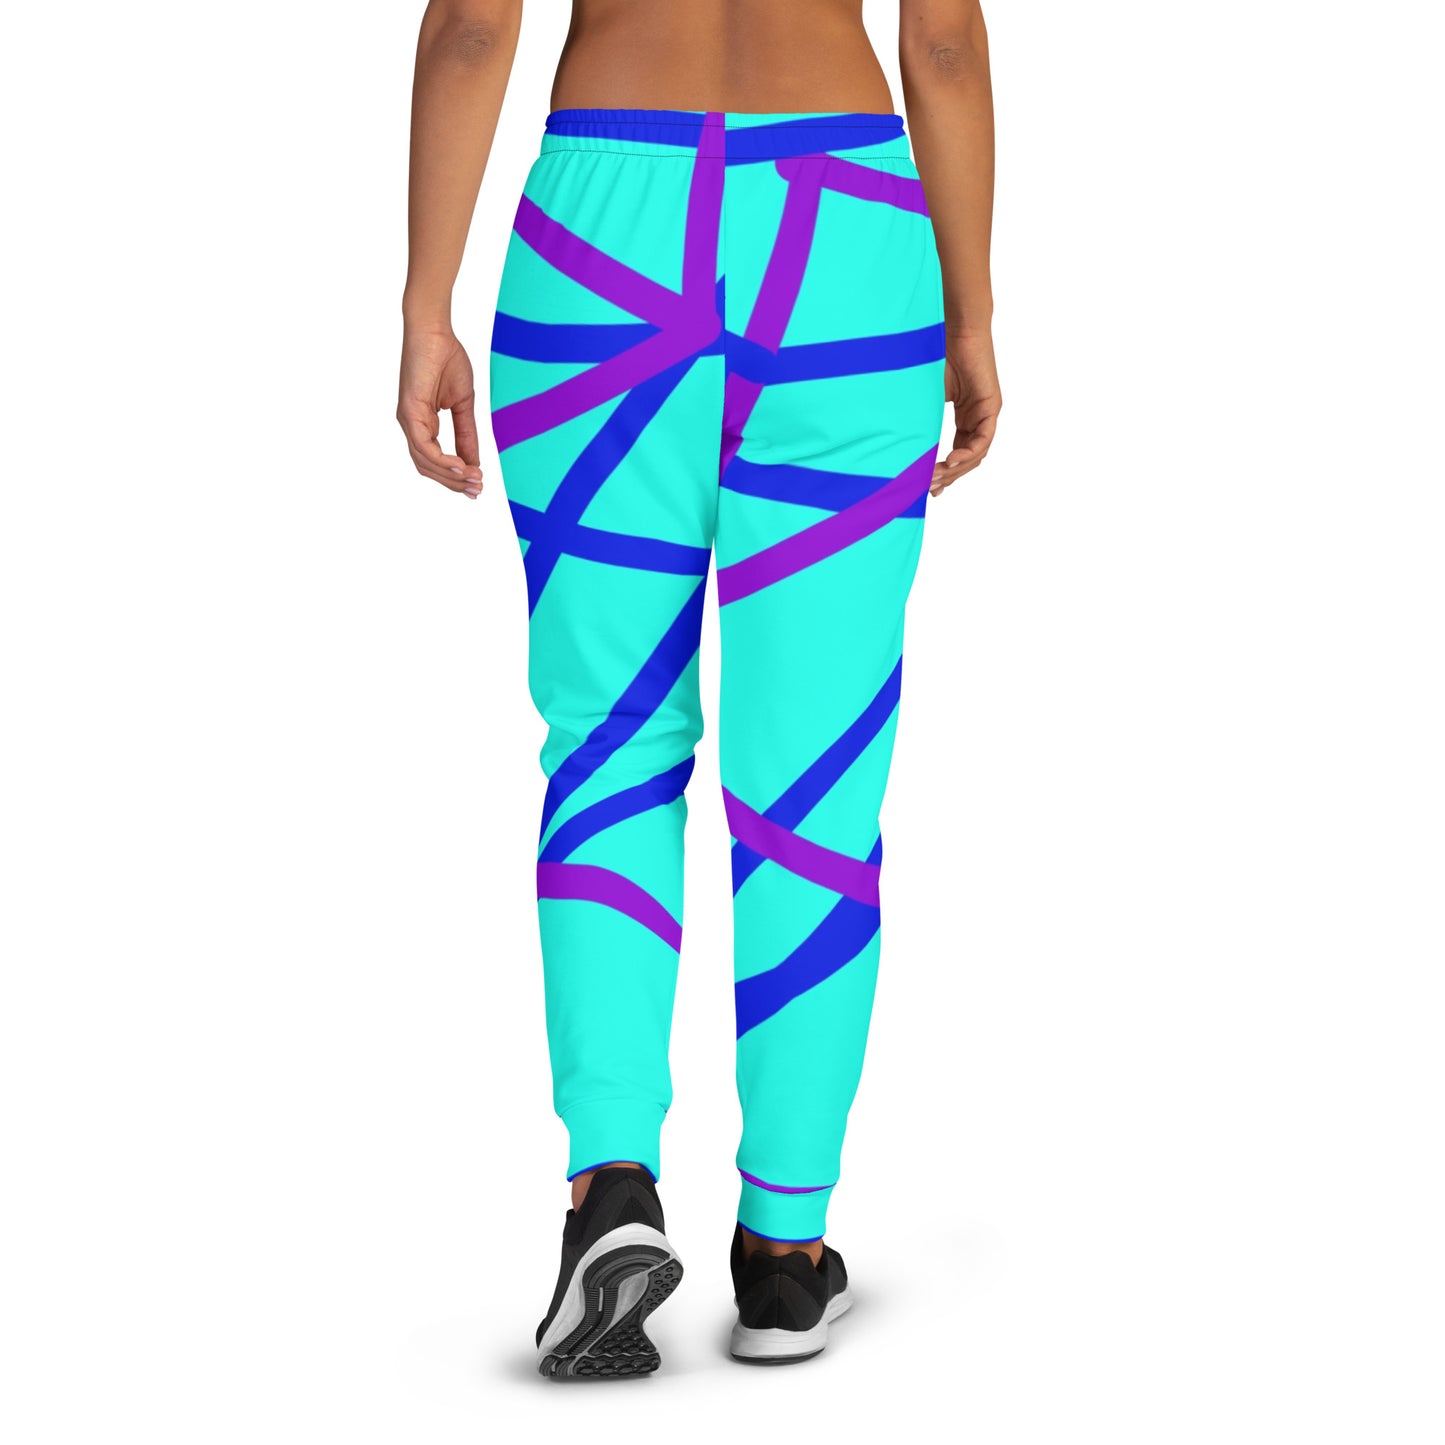 Women's "Why Not" Joggers